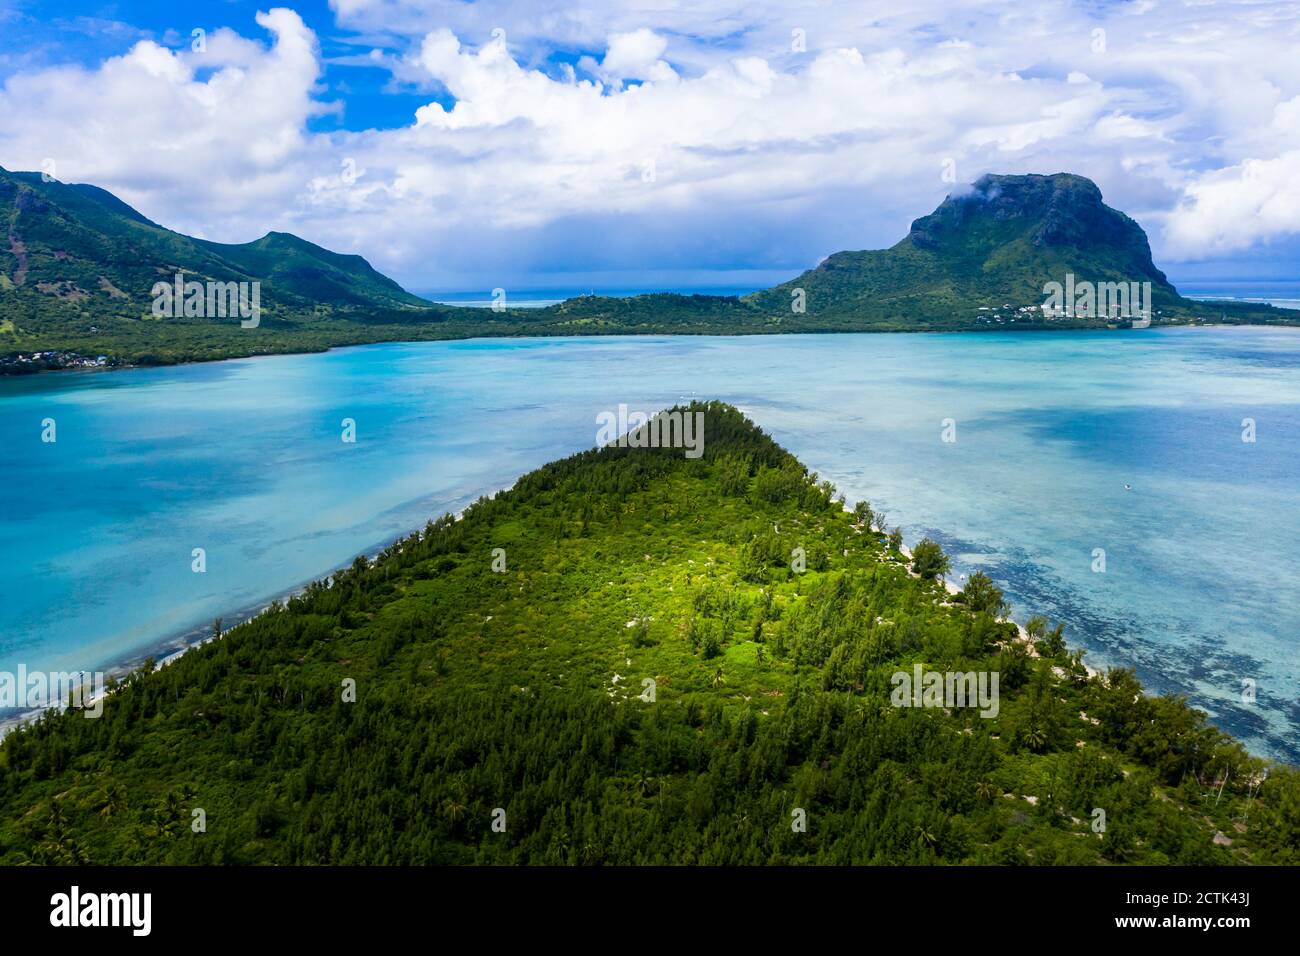 Mauritius, Black River, Tamarin, Helicopter view of green peninsula and Le Morne Brabant mountain Stock Photo